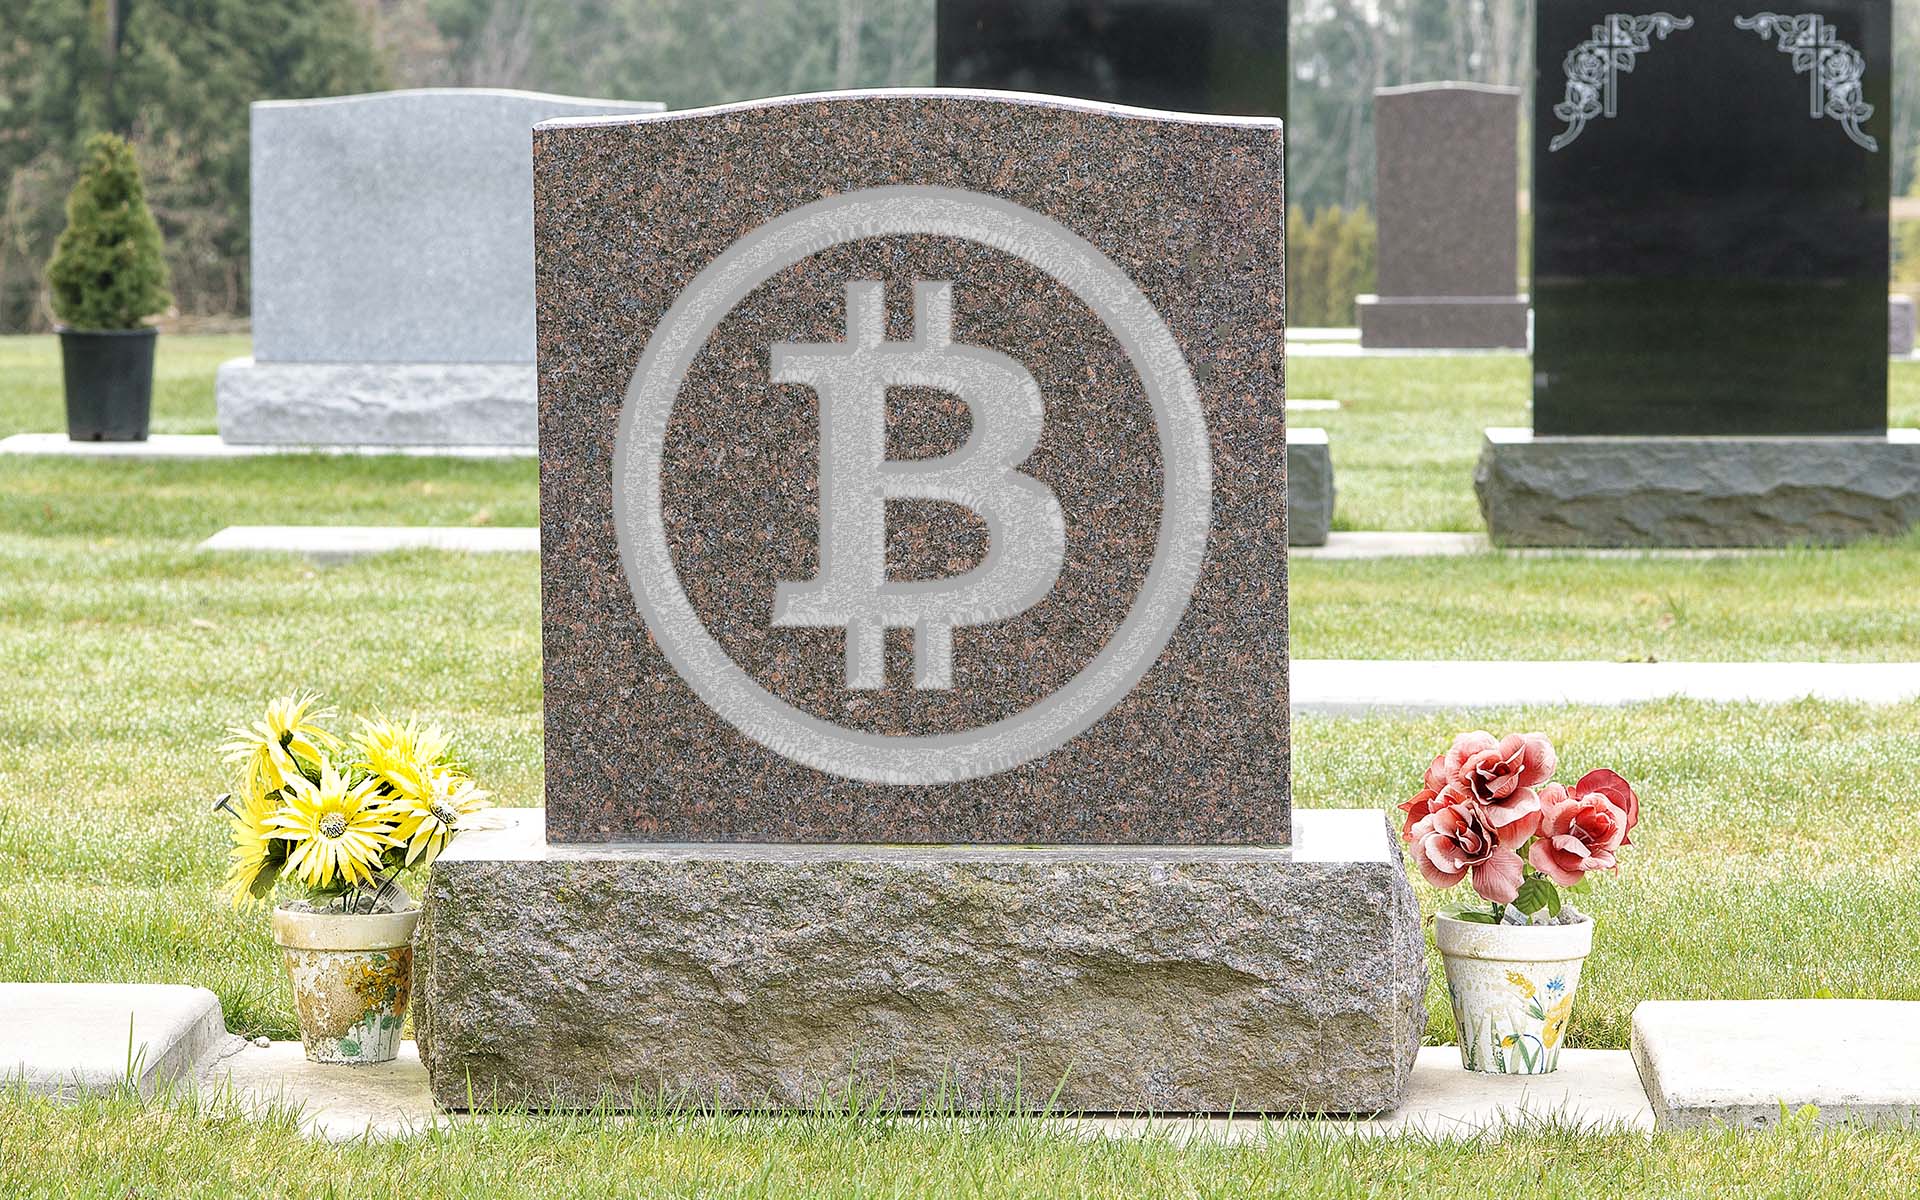 Bitcoin is dead 2017 ethereum shapeshift